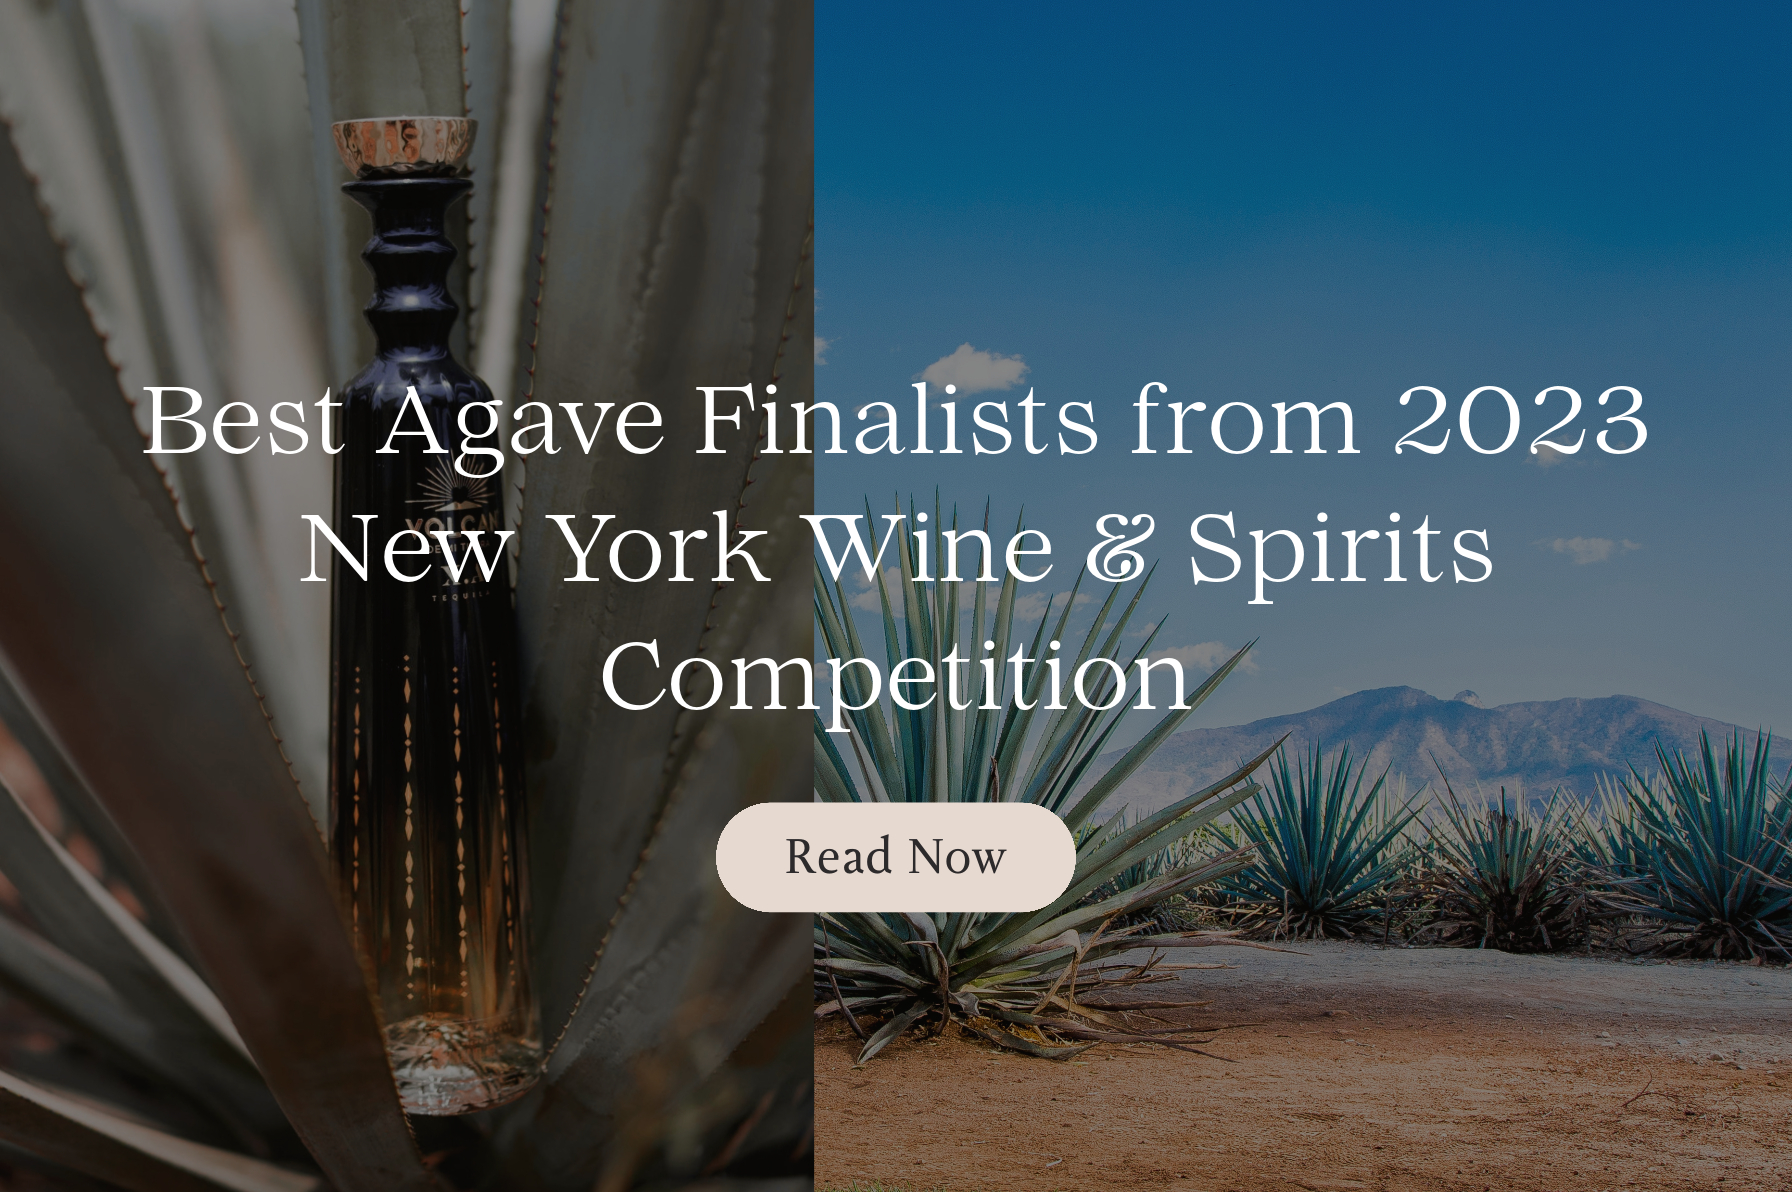 The Tasting Alliance's Best Agave from 2023 New York World Wine & Spirits Competition